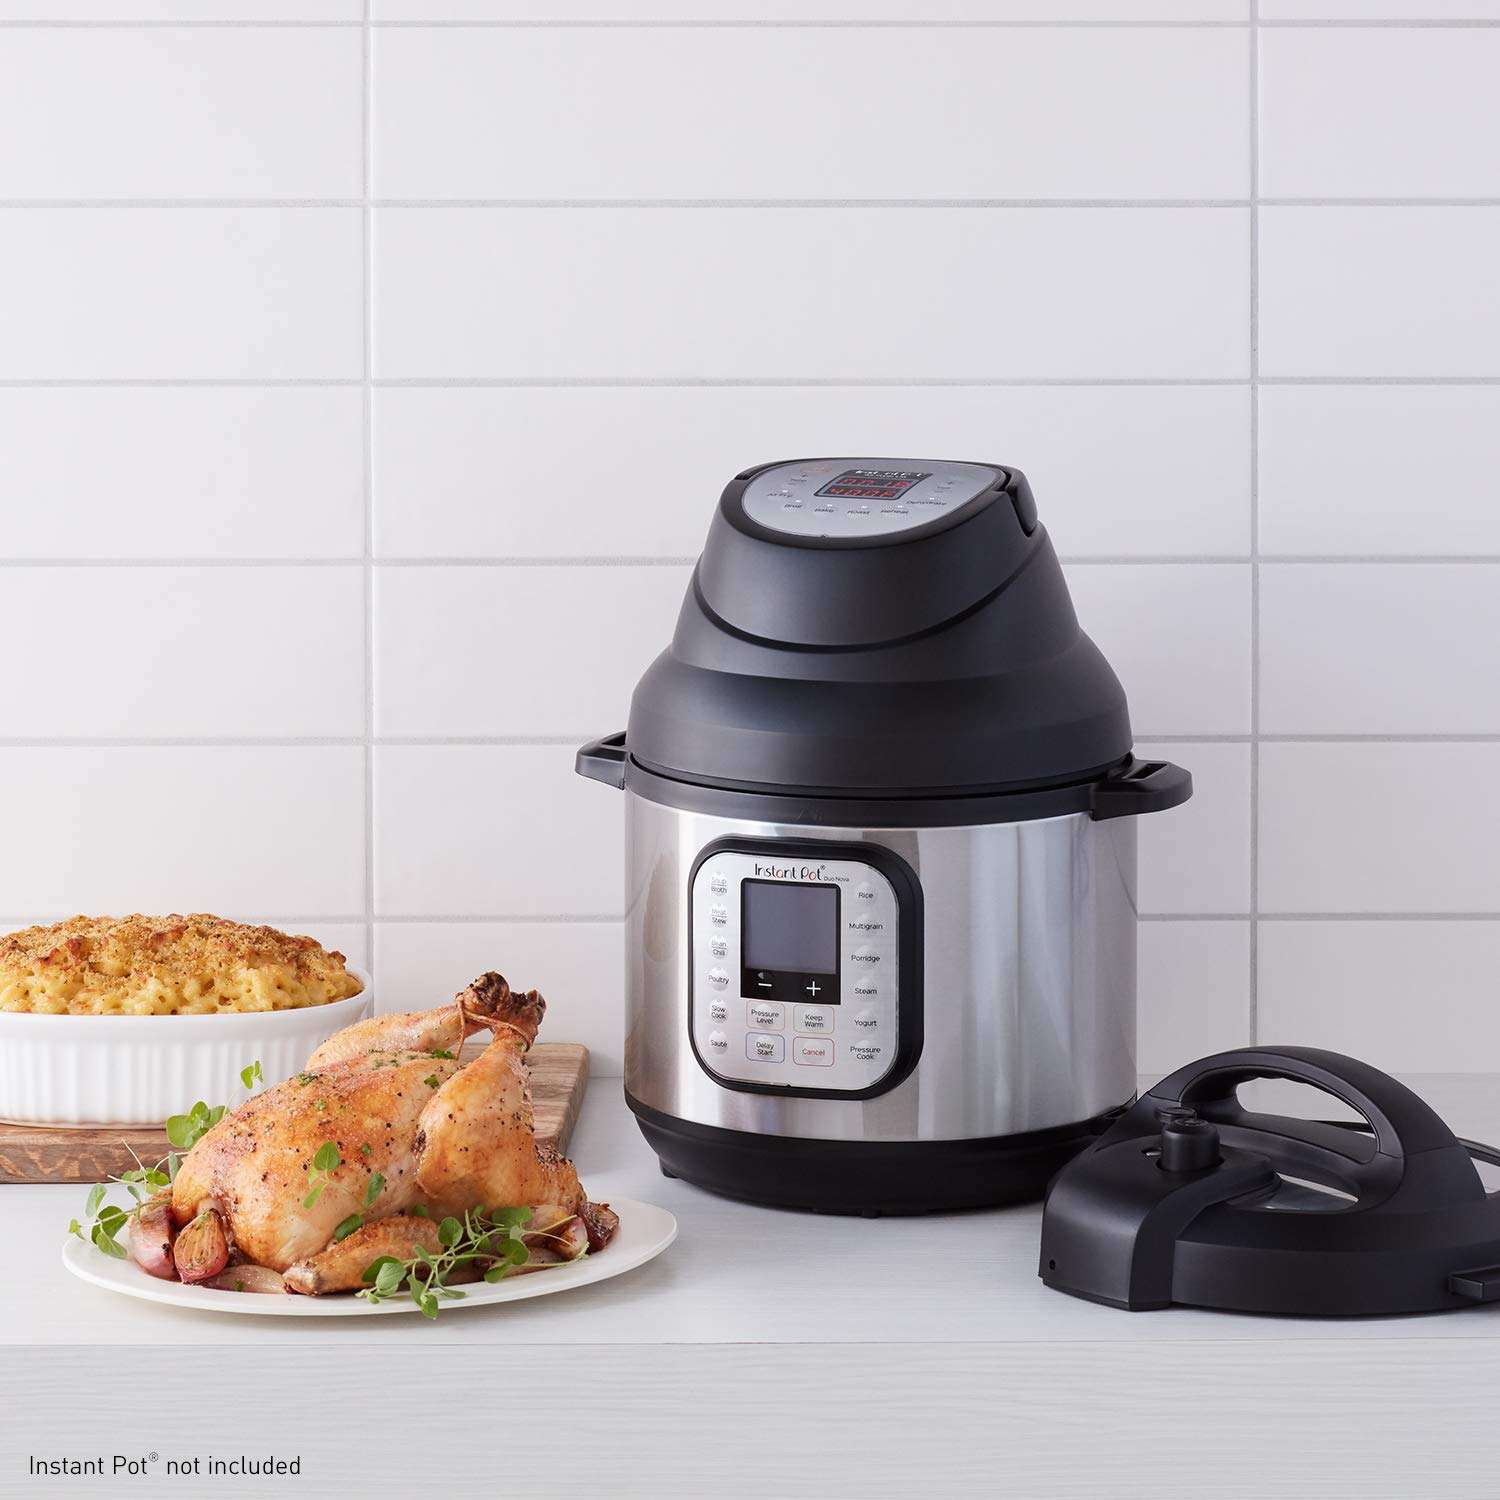 This new lid can turn your Instant Pot into an air fryer